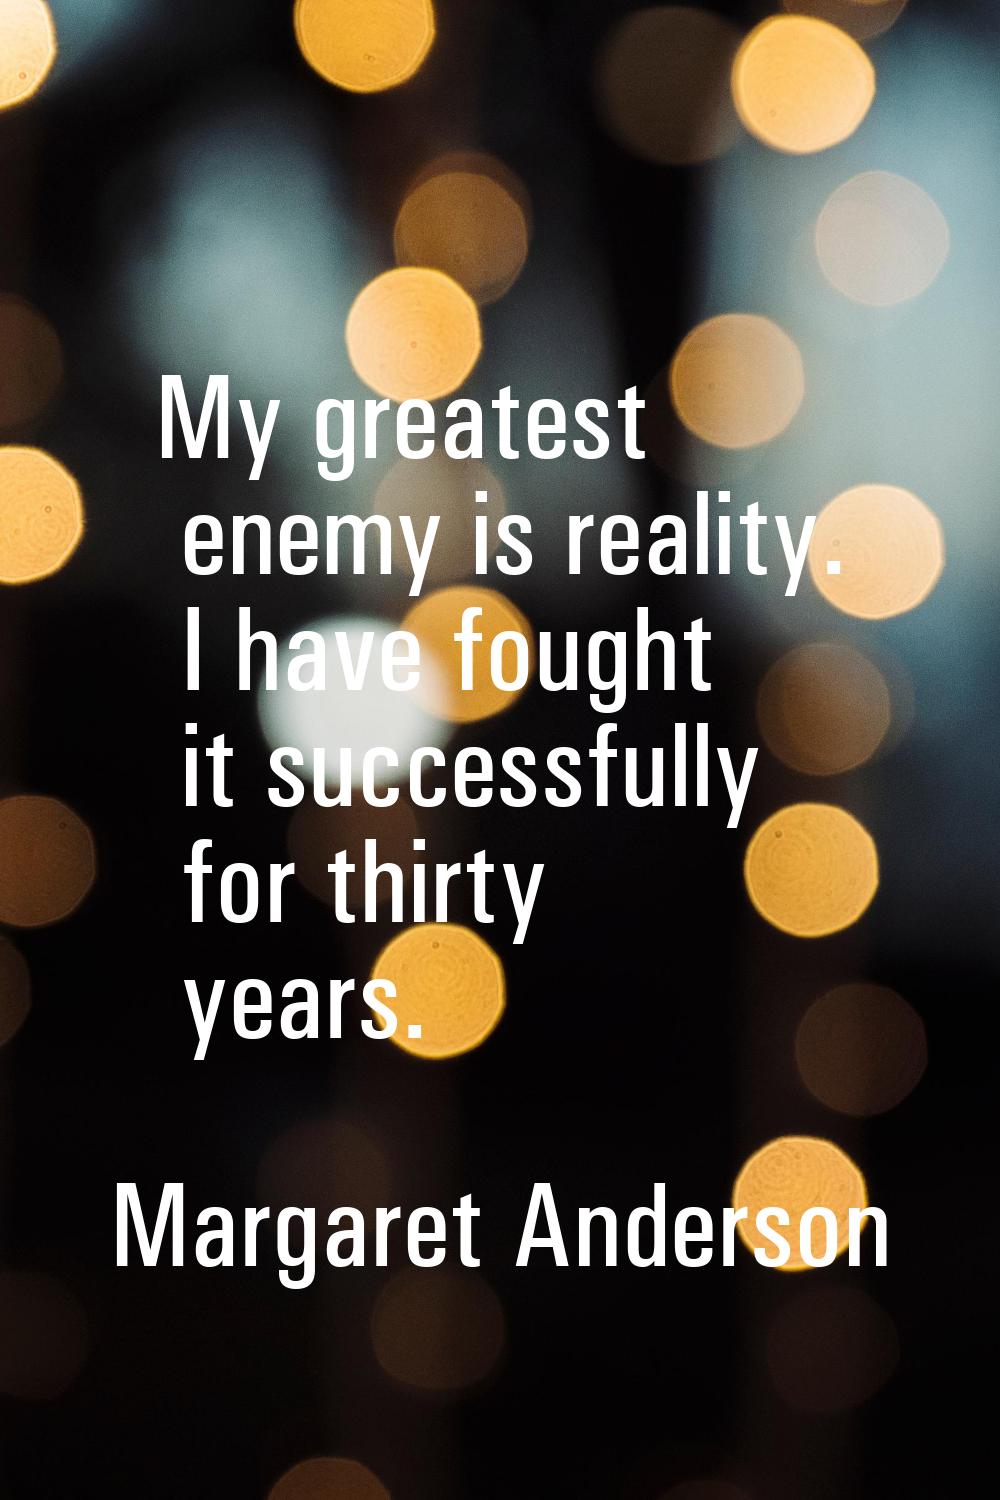 My greatest enemy is reality. I have fought it successfully for thirty years.